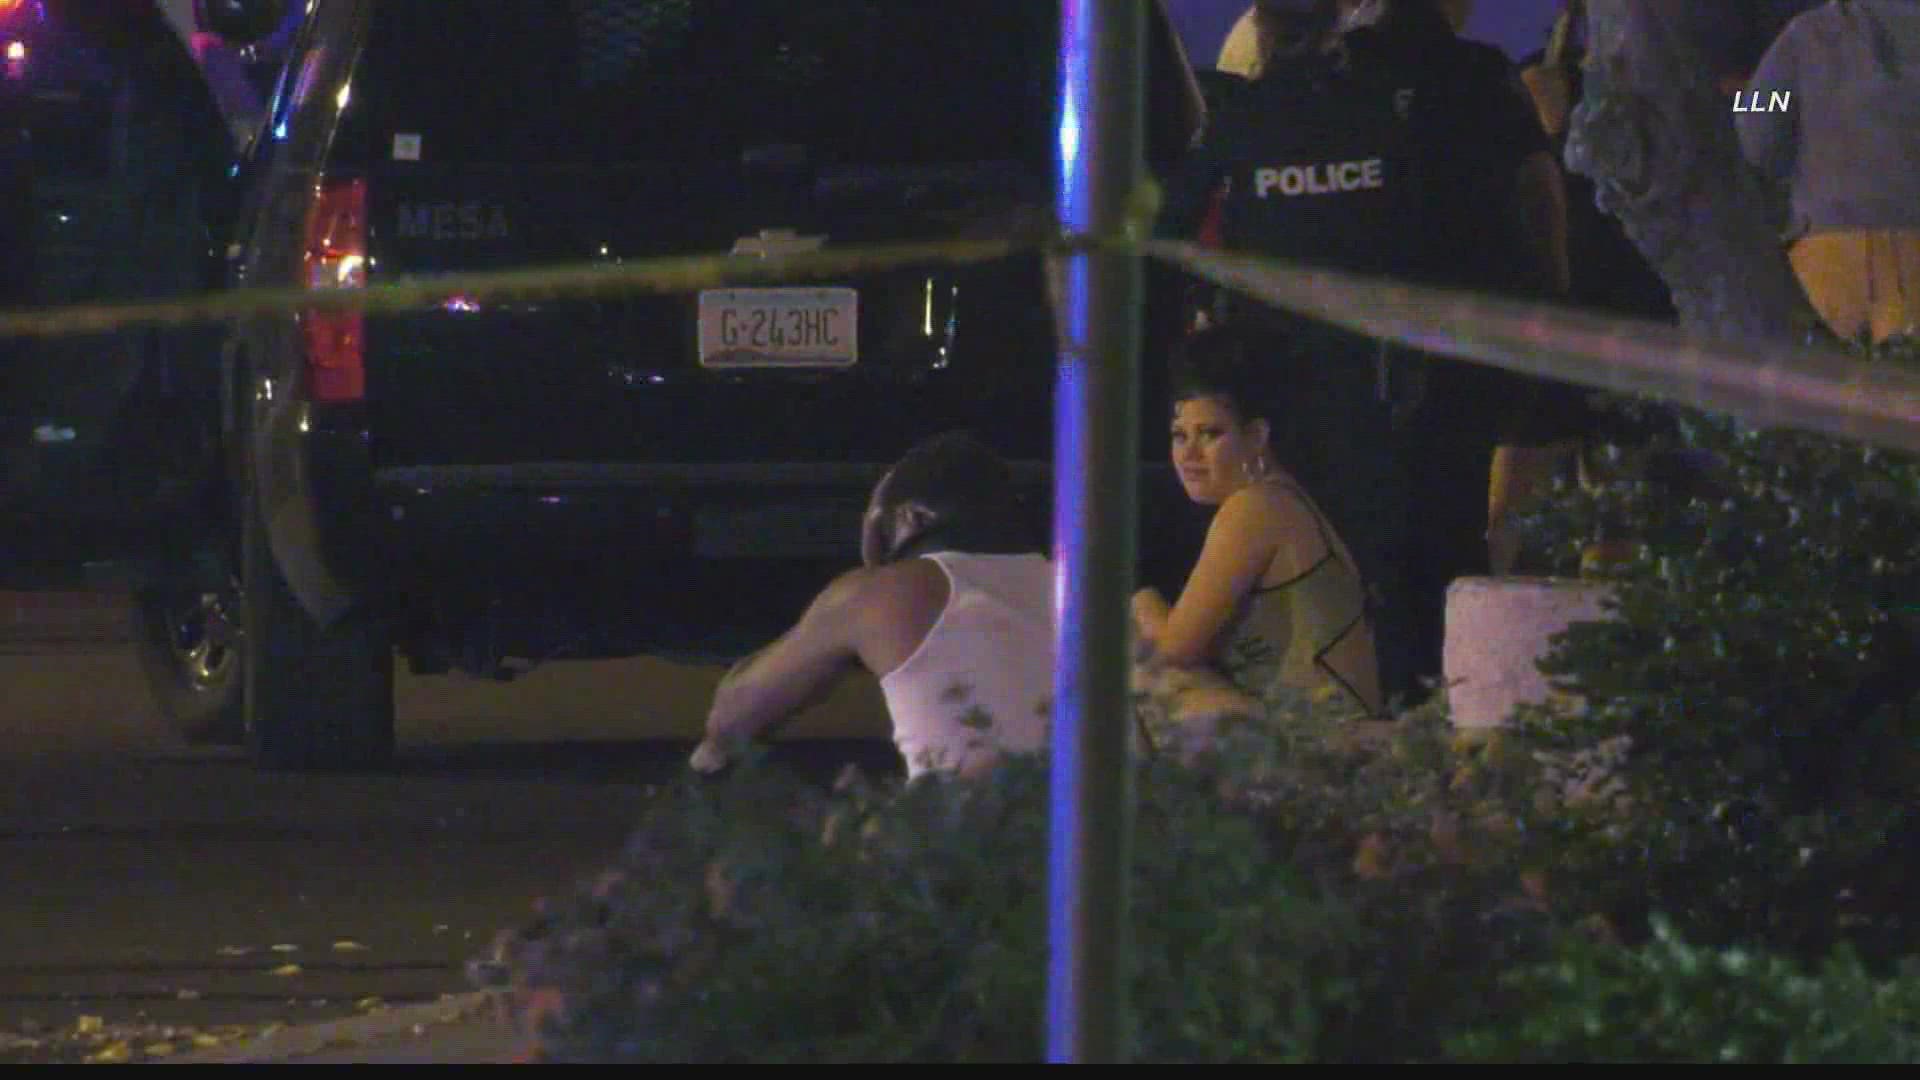 Police say they've taken three suspects into custody after a shooting broke out at the Lounge Soho overnight.